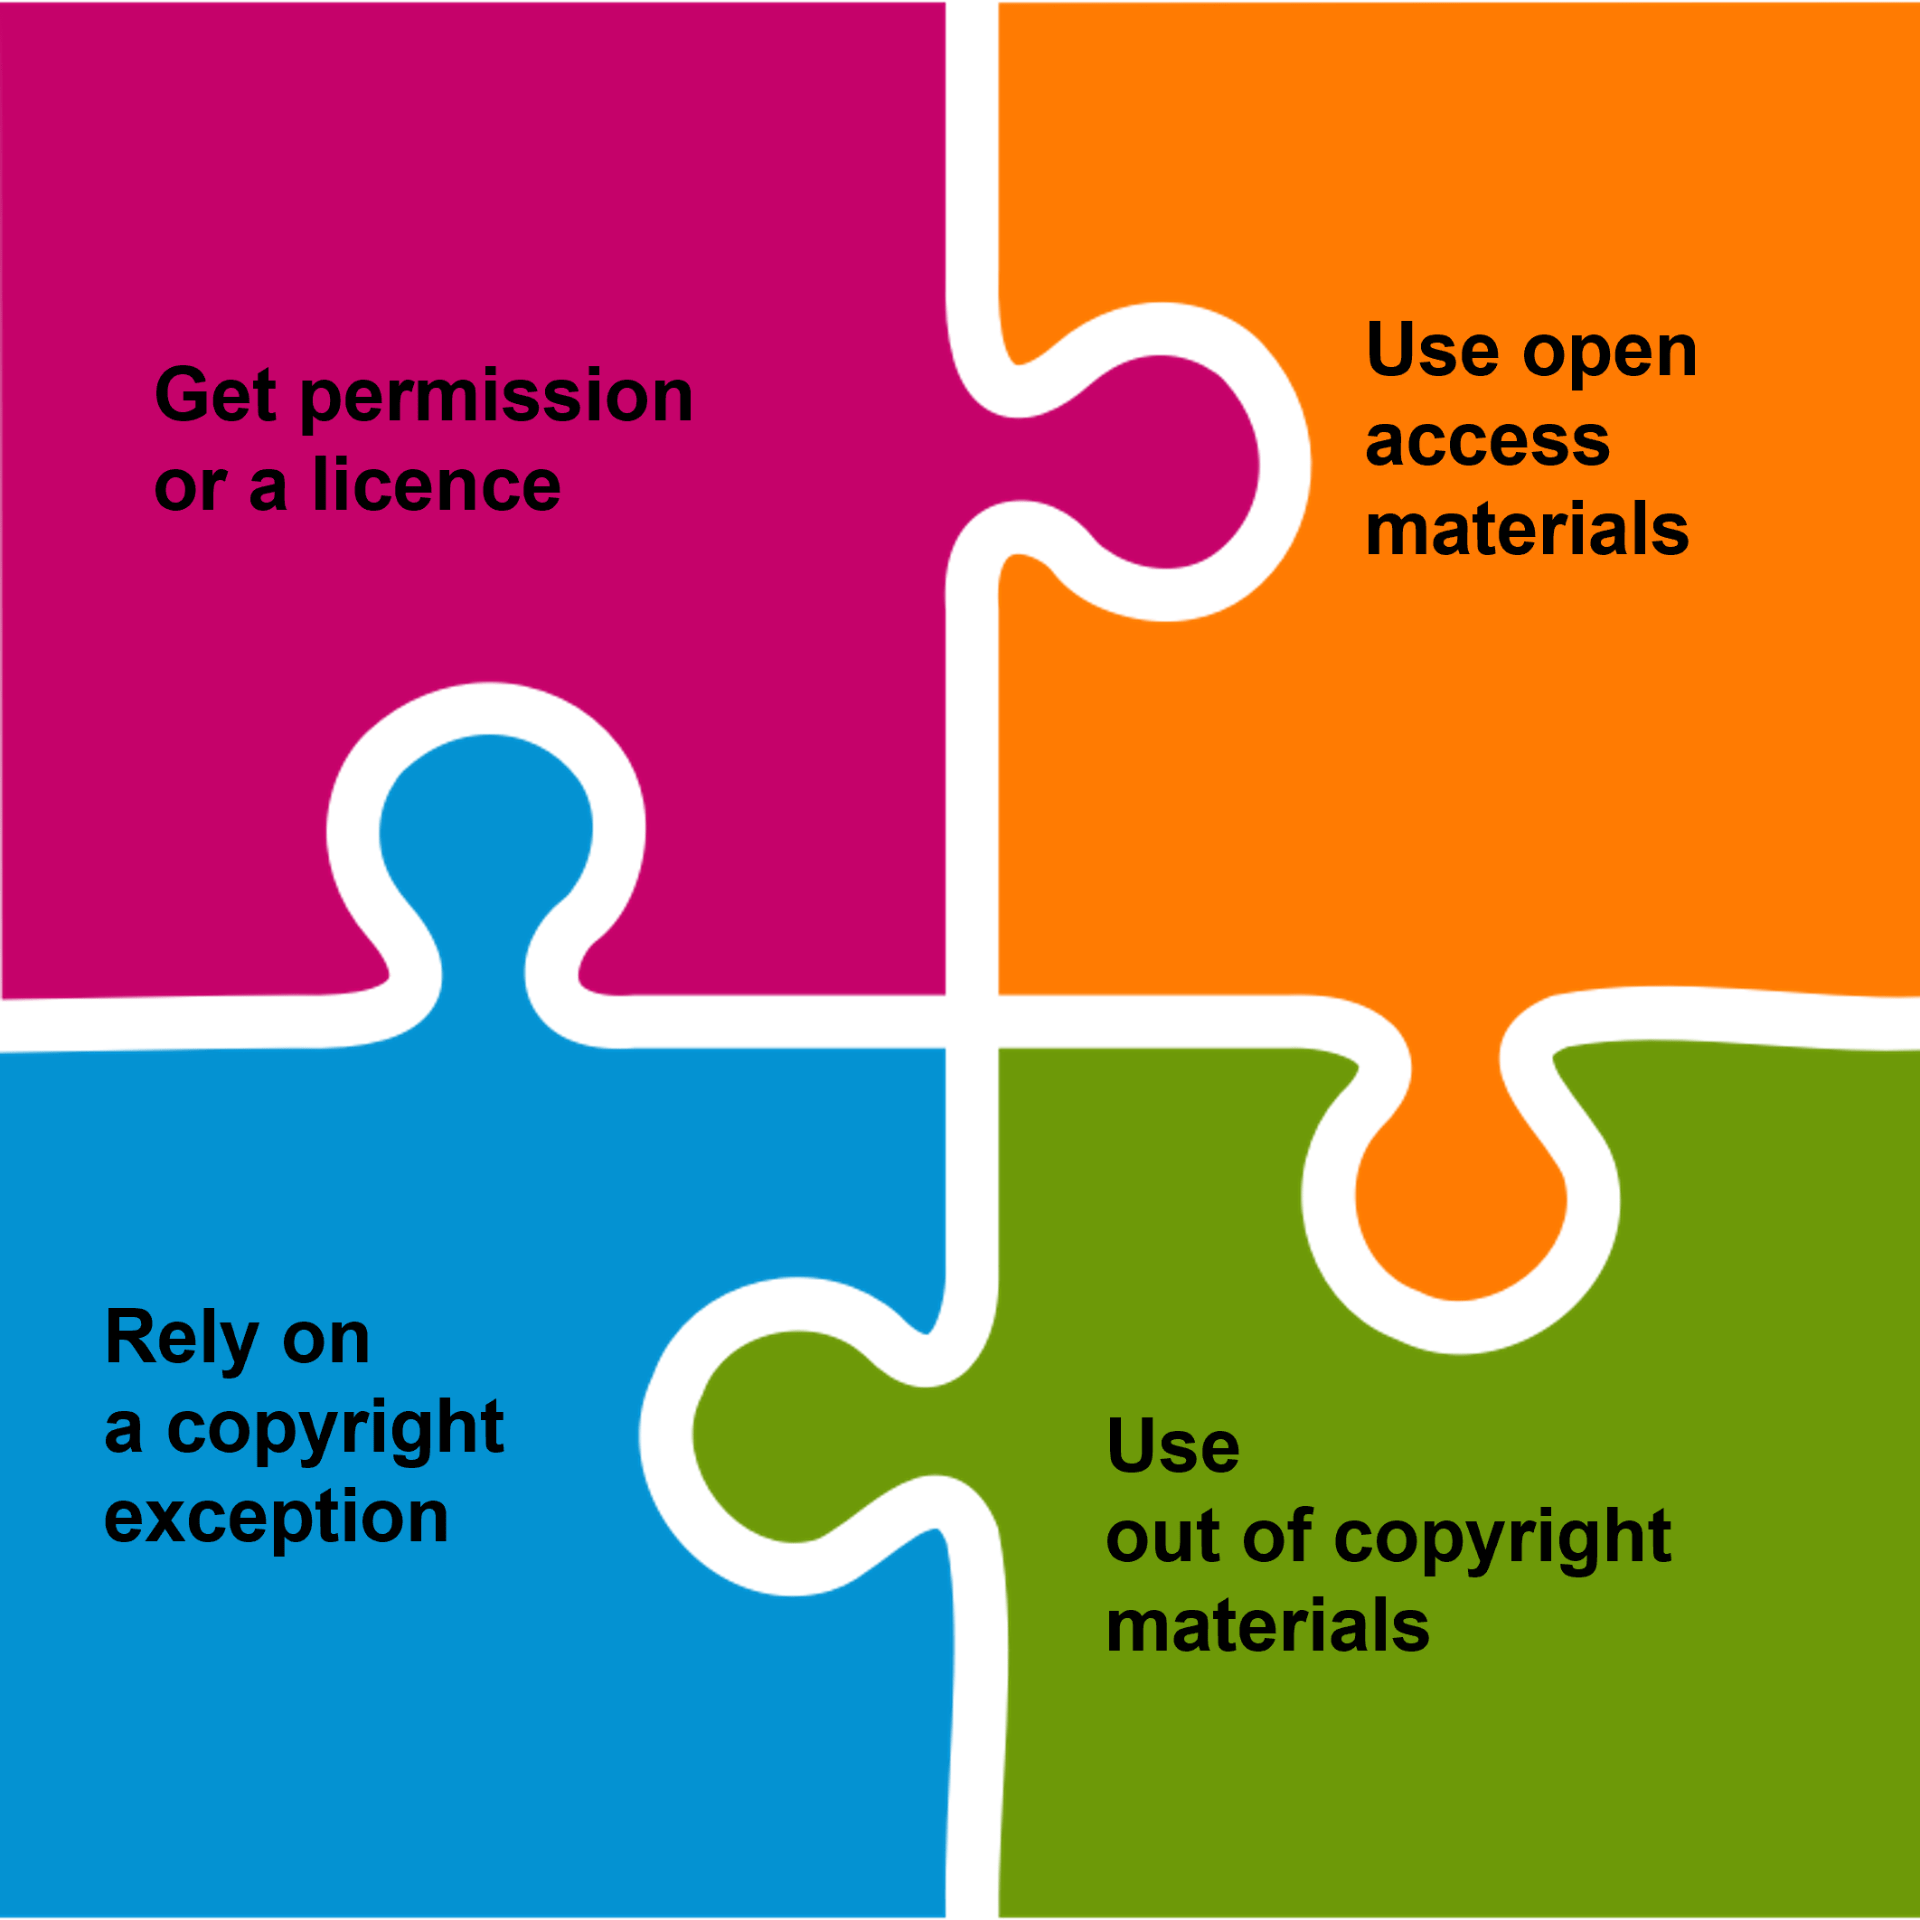  'Get permission or a licence', 'Use open access materials', Rely on a copyright exception', 'Use out of copyright materials'.